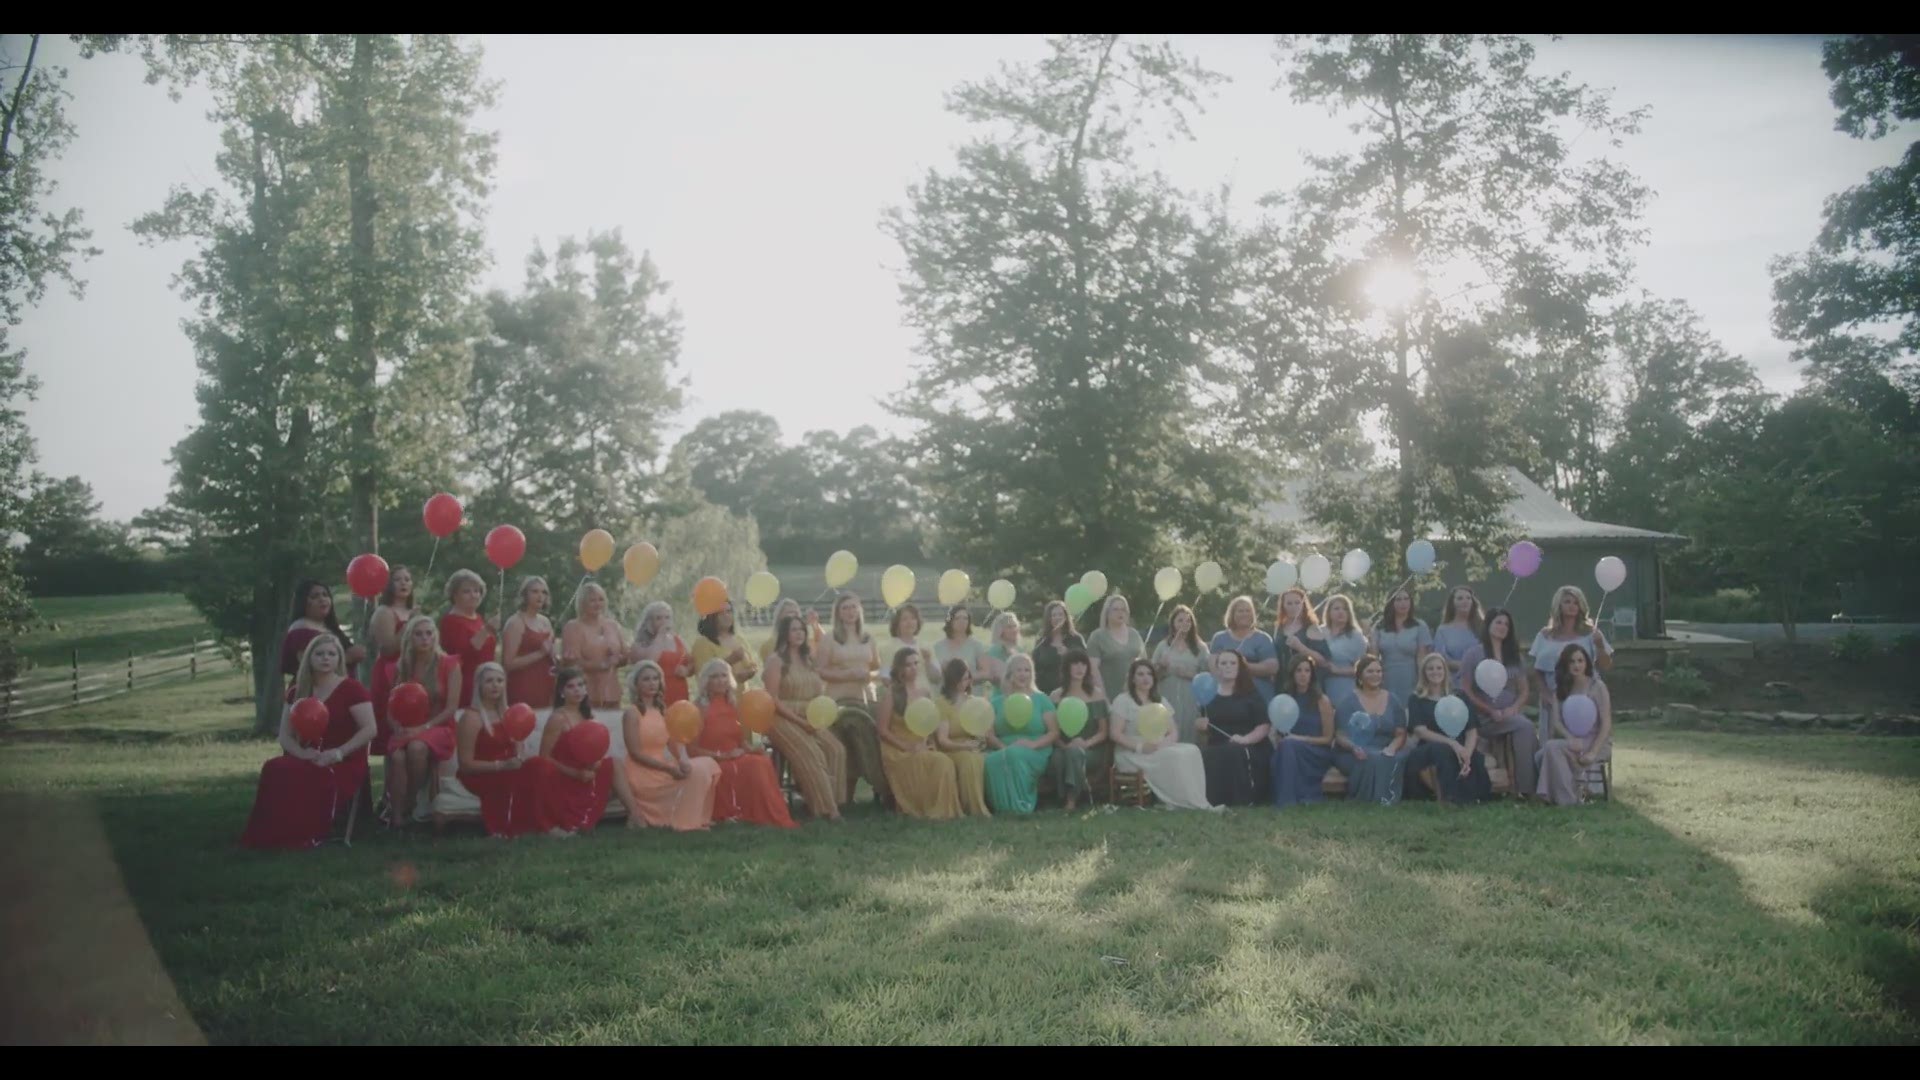 This photographer brought together 79 mothers and 'rainbow babies' for an inspiring photoshoot.